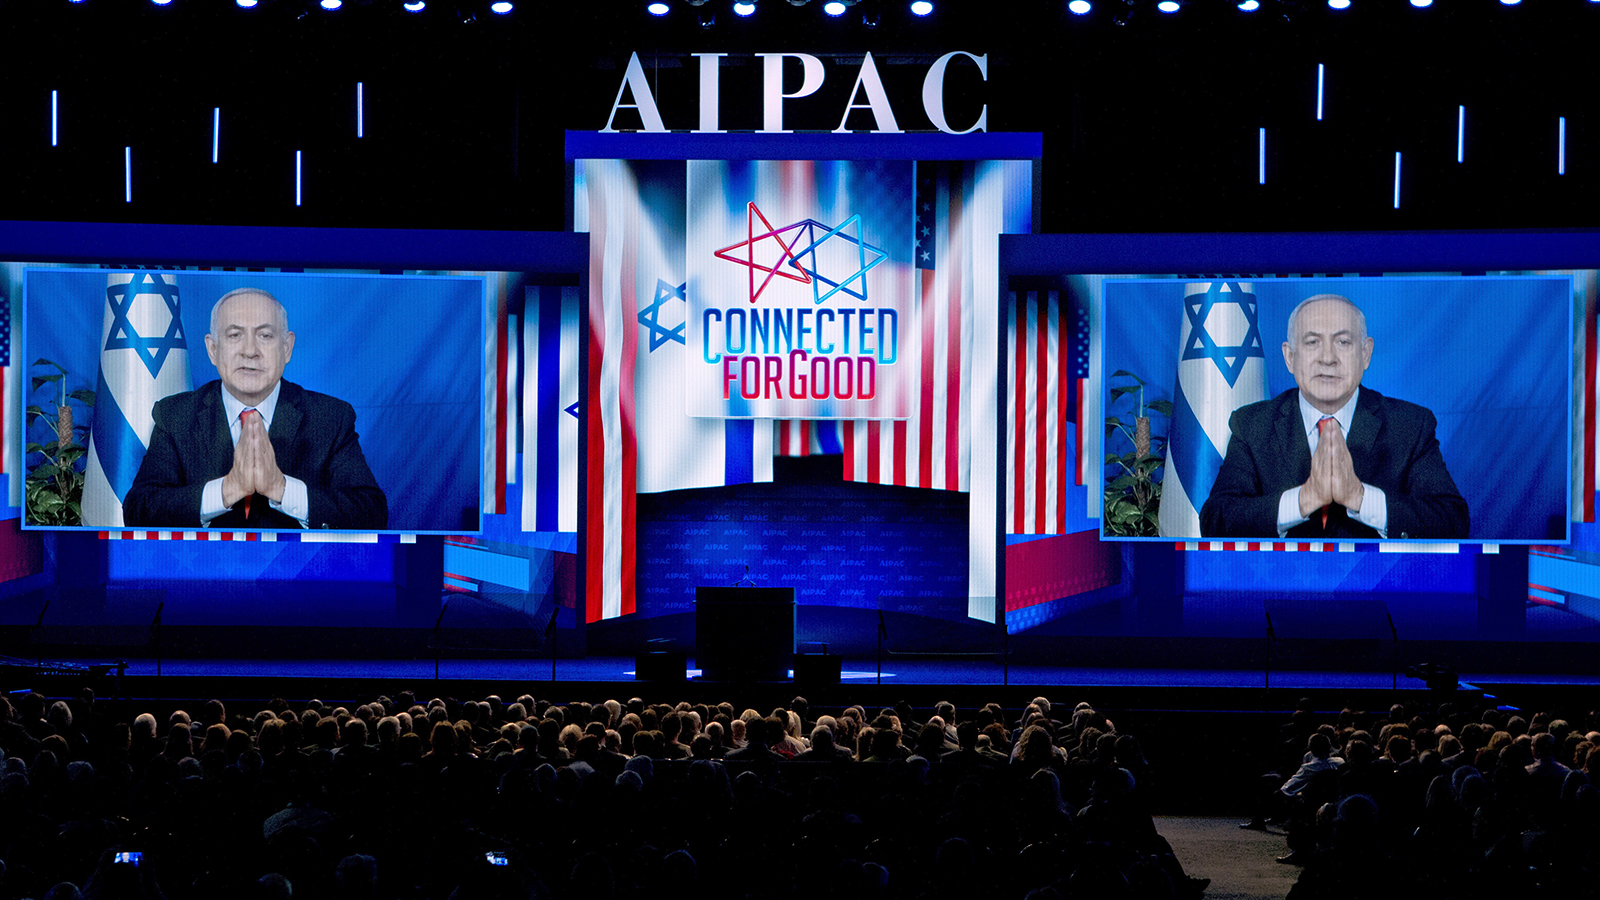 Israeli Prime Minister Benjamin Netanyahu speaks via video from Israel to the 2019 American Israel Public Affairs Committee (AIPAC) policy conference, at Washington Convention Center, in Washington, on March 26, 2019. (AP Photo/Jose Luis Magana)